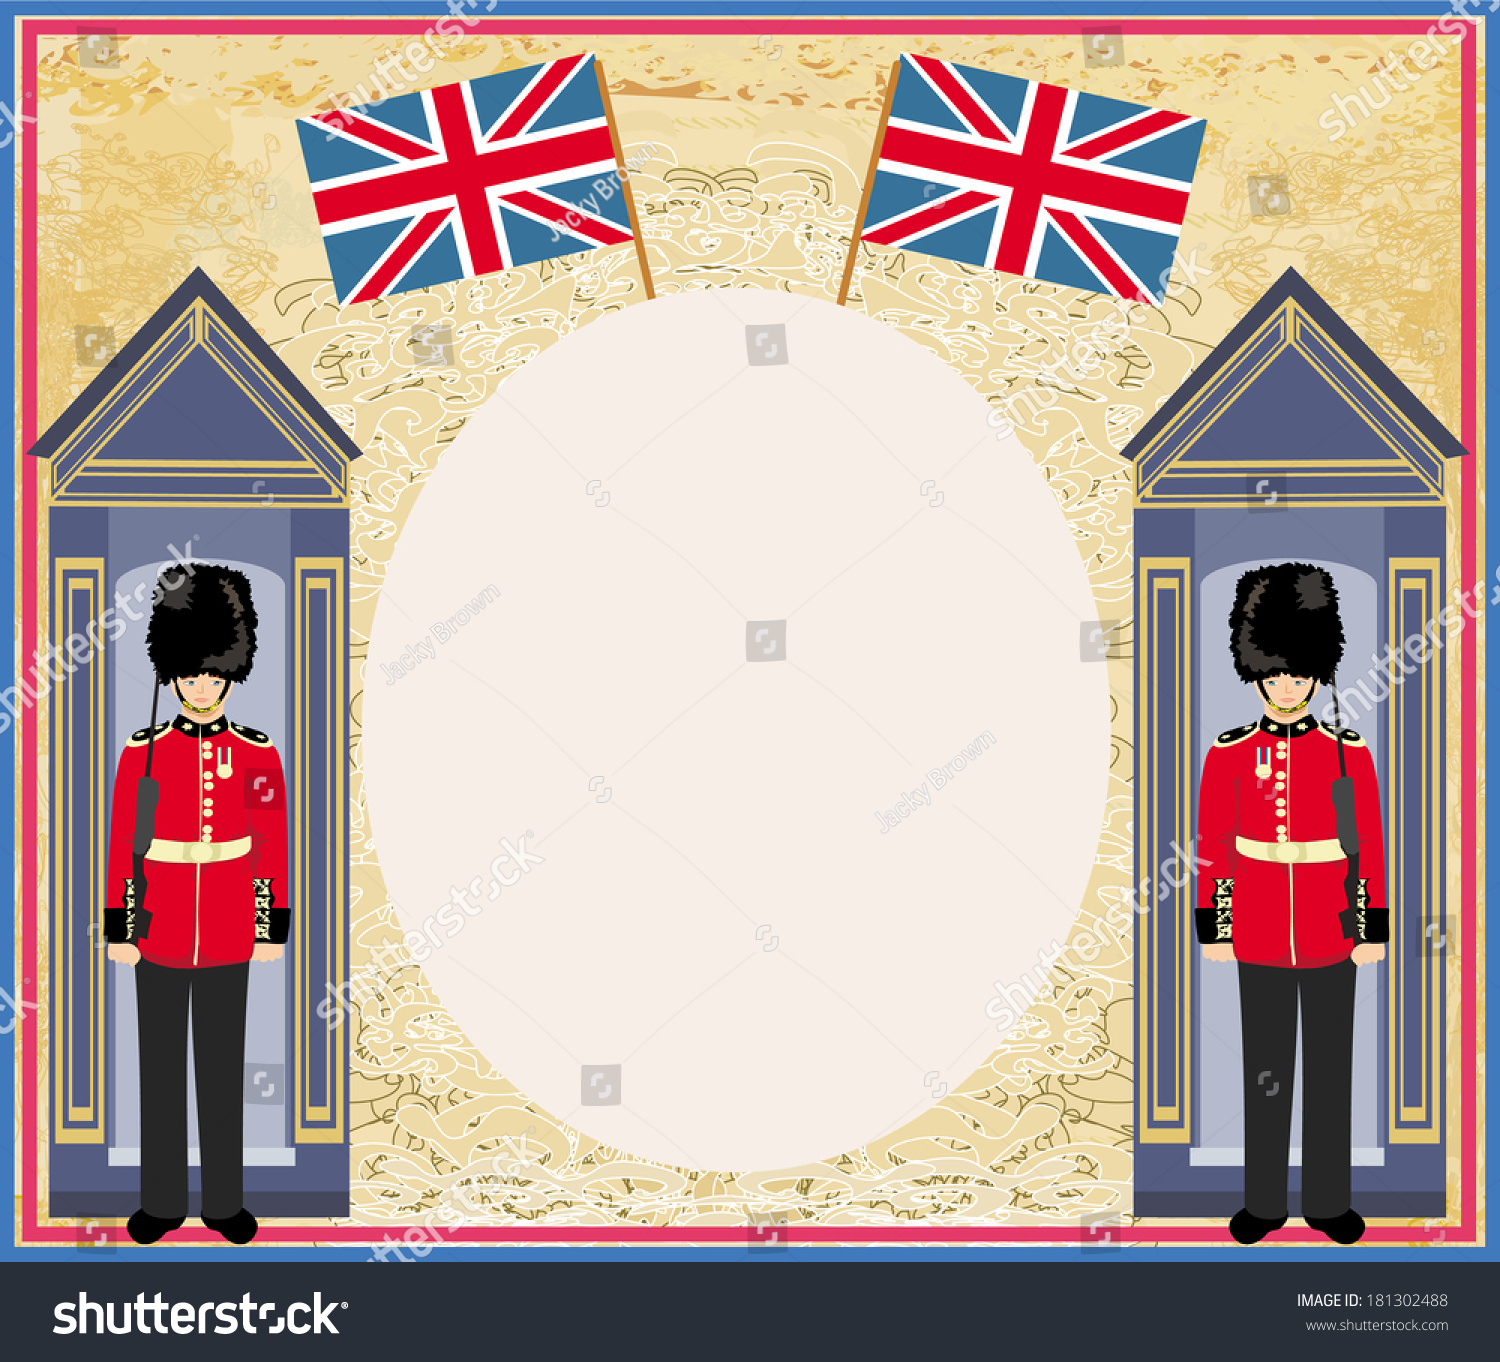 SVG of abstract background with flag england and Beefeater soldier  svg